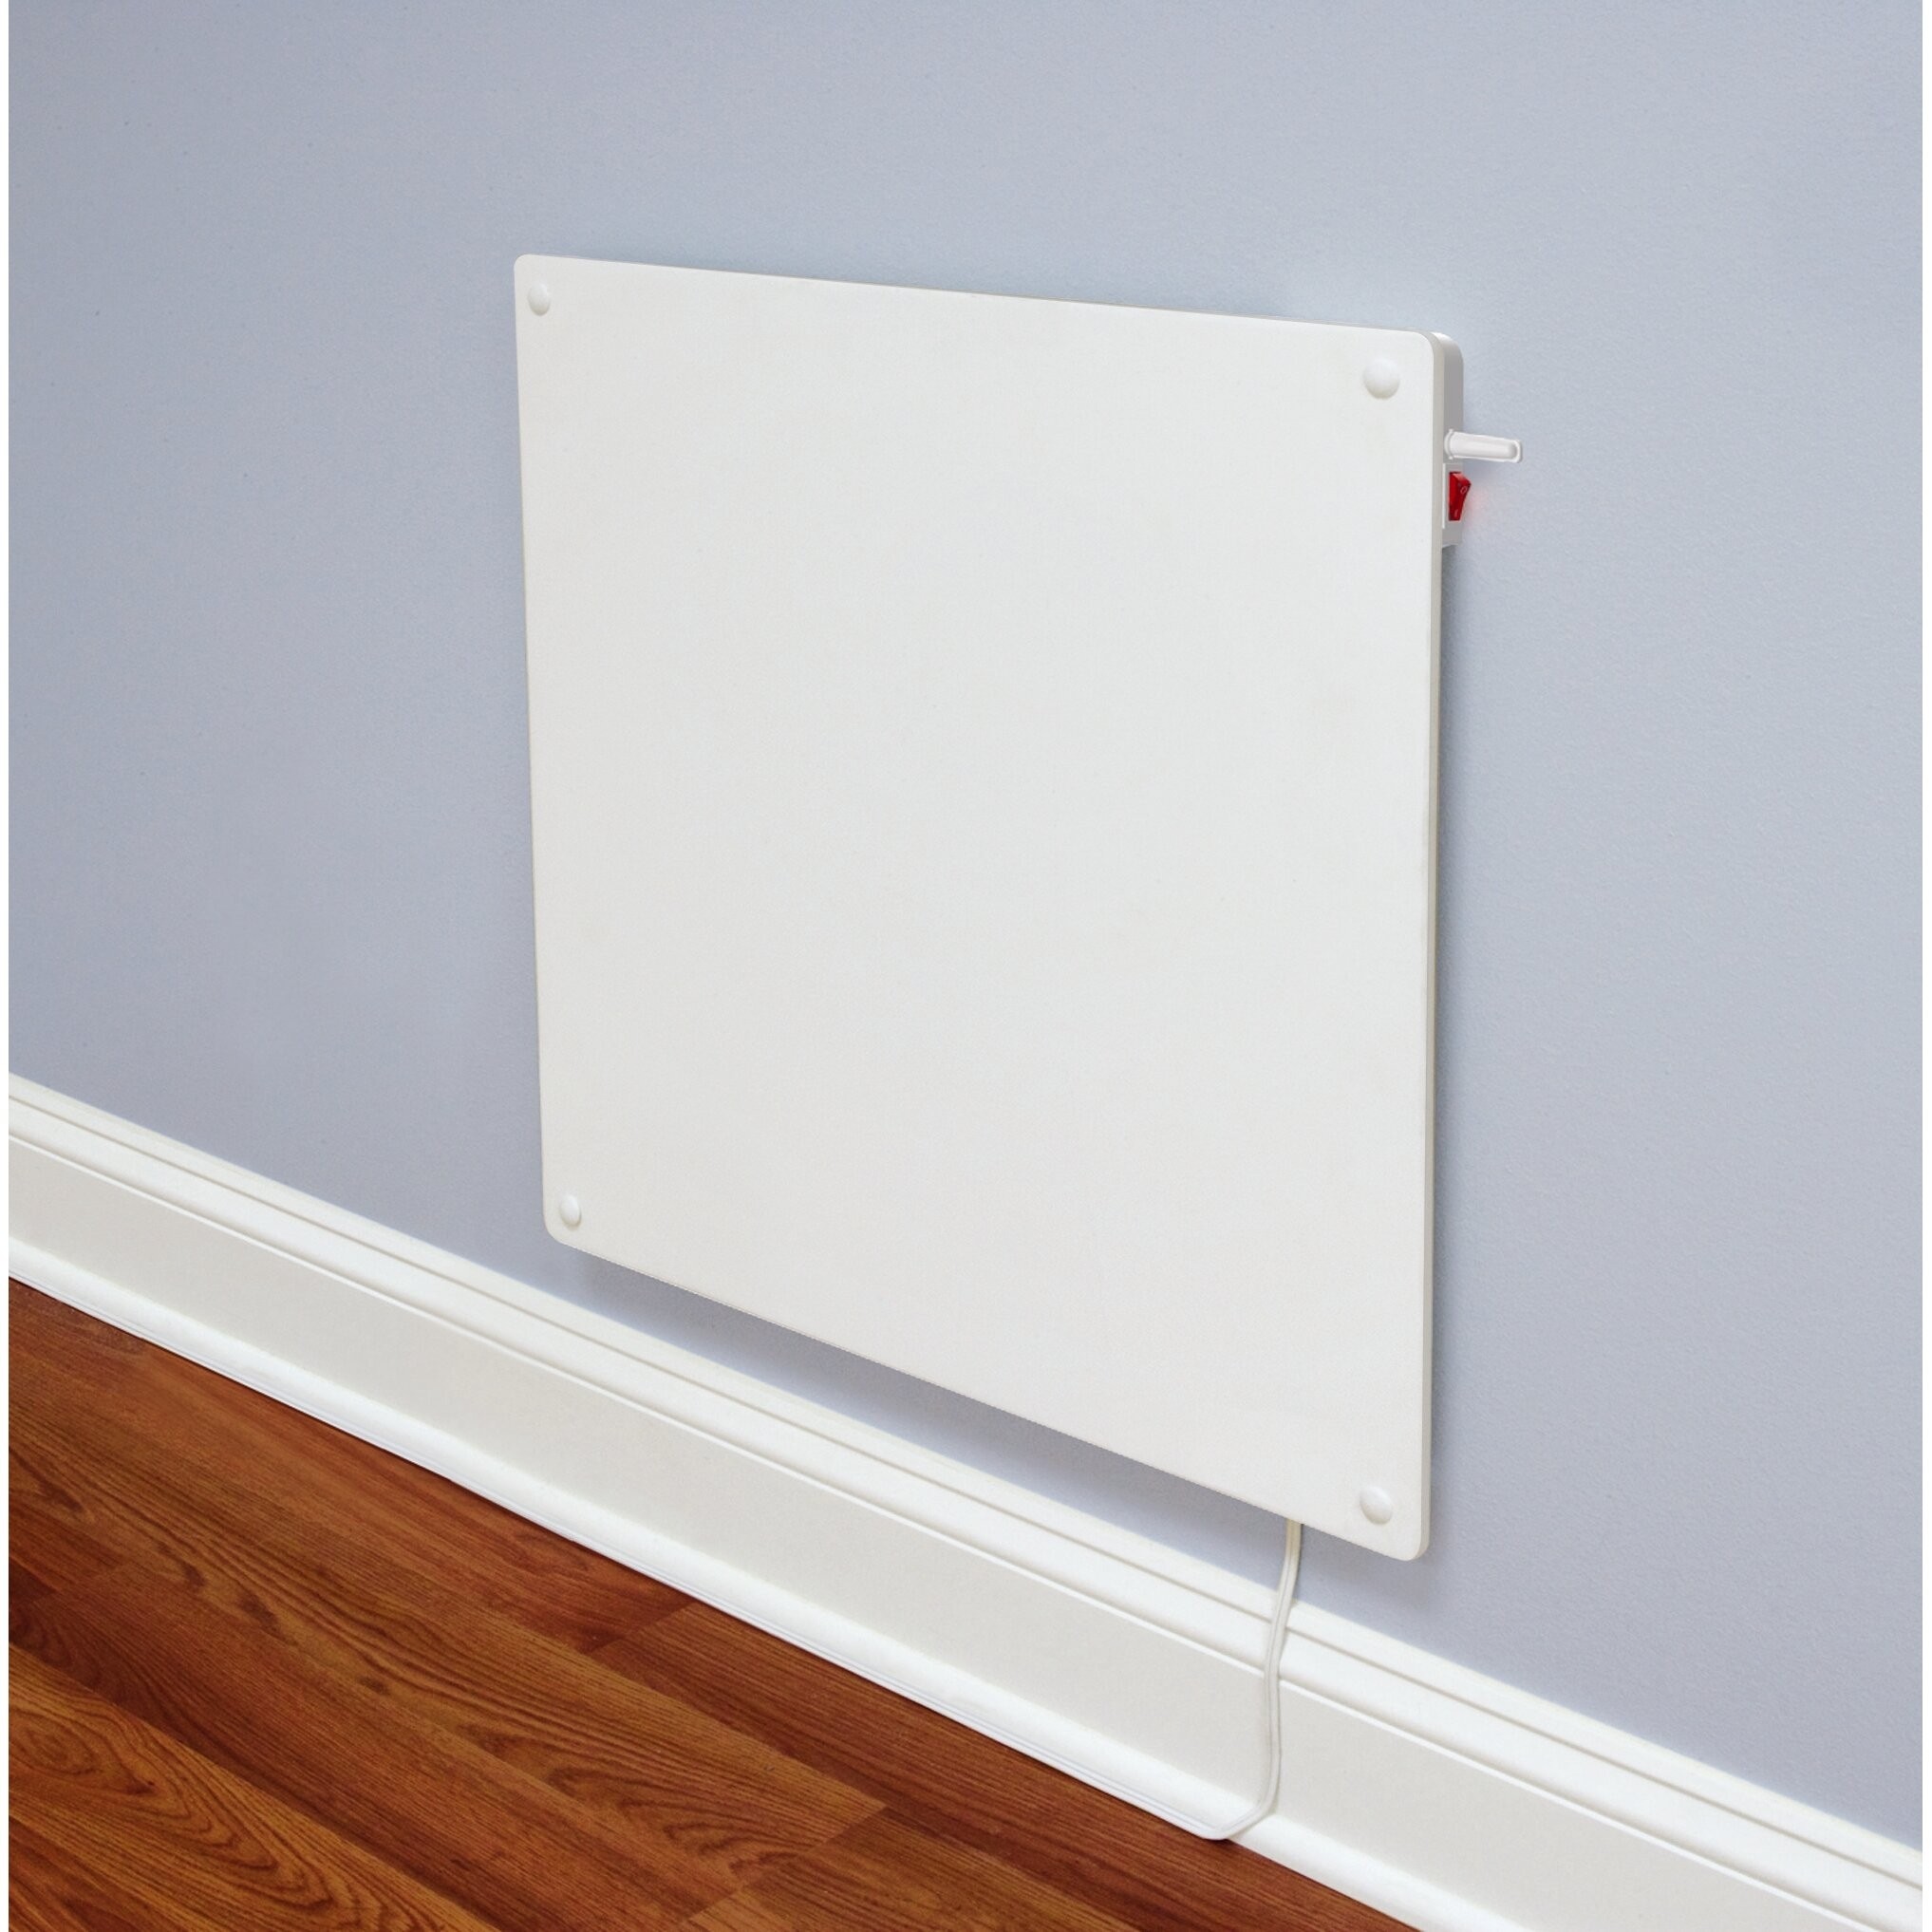 Ecoheater 1 364 btu wall mounted electric convection panel